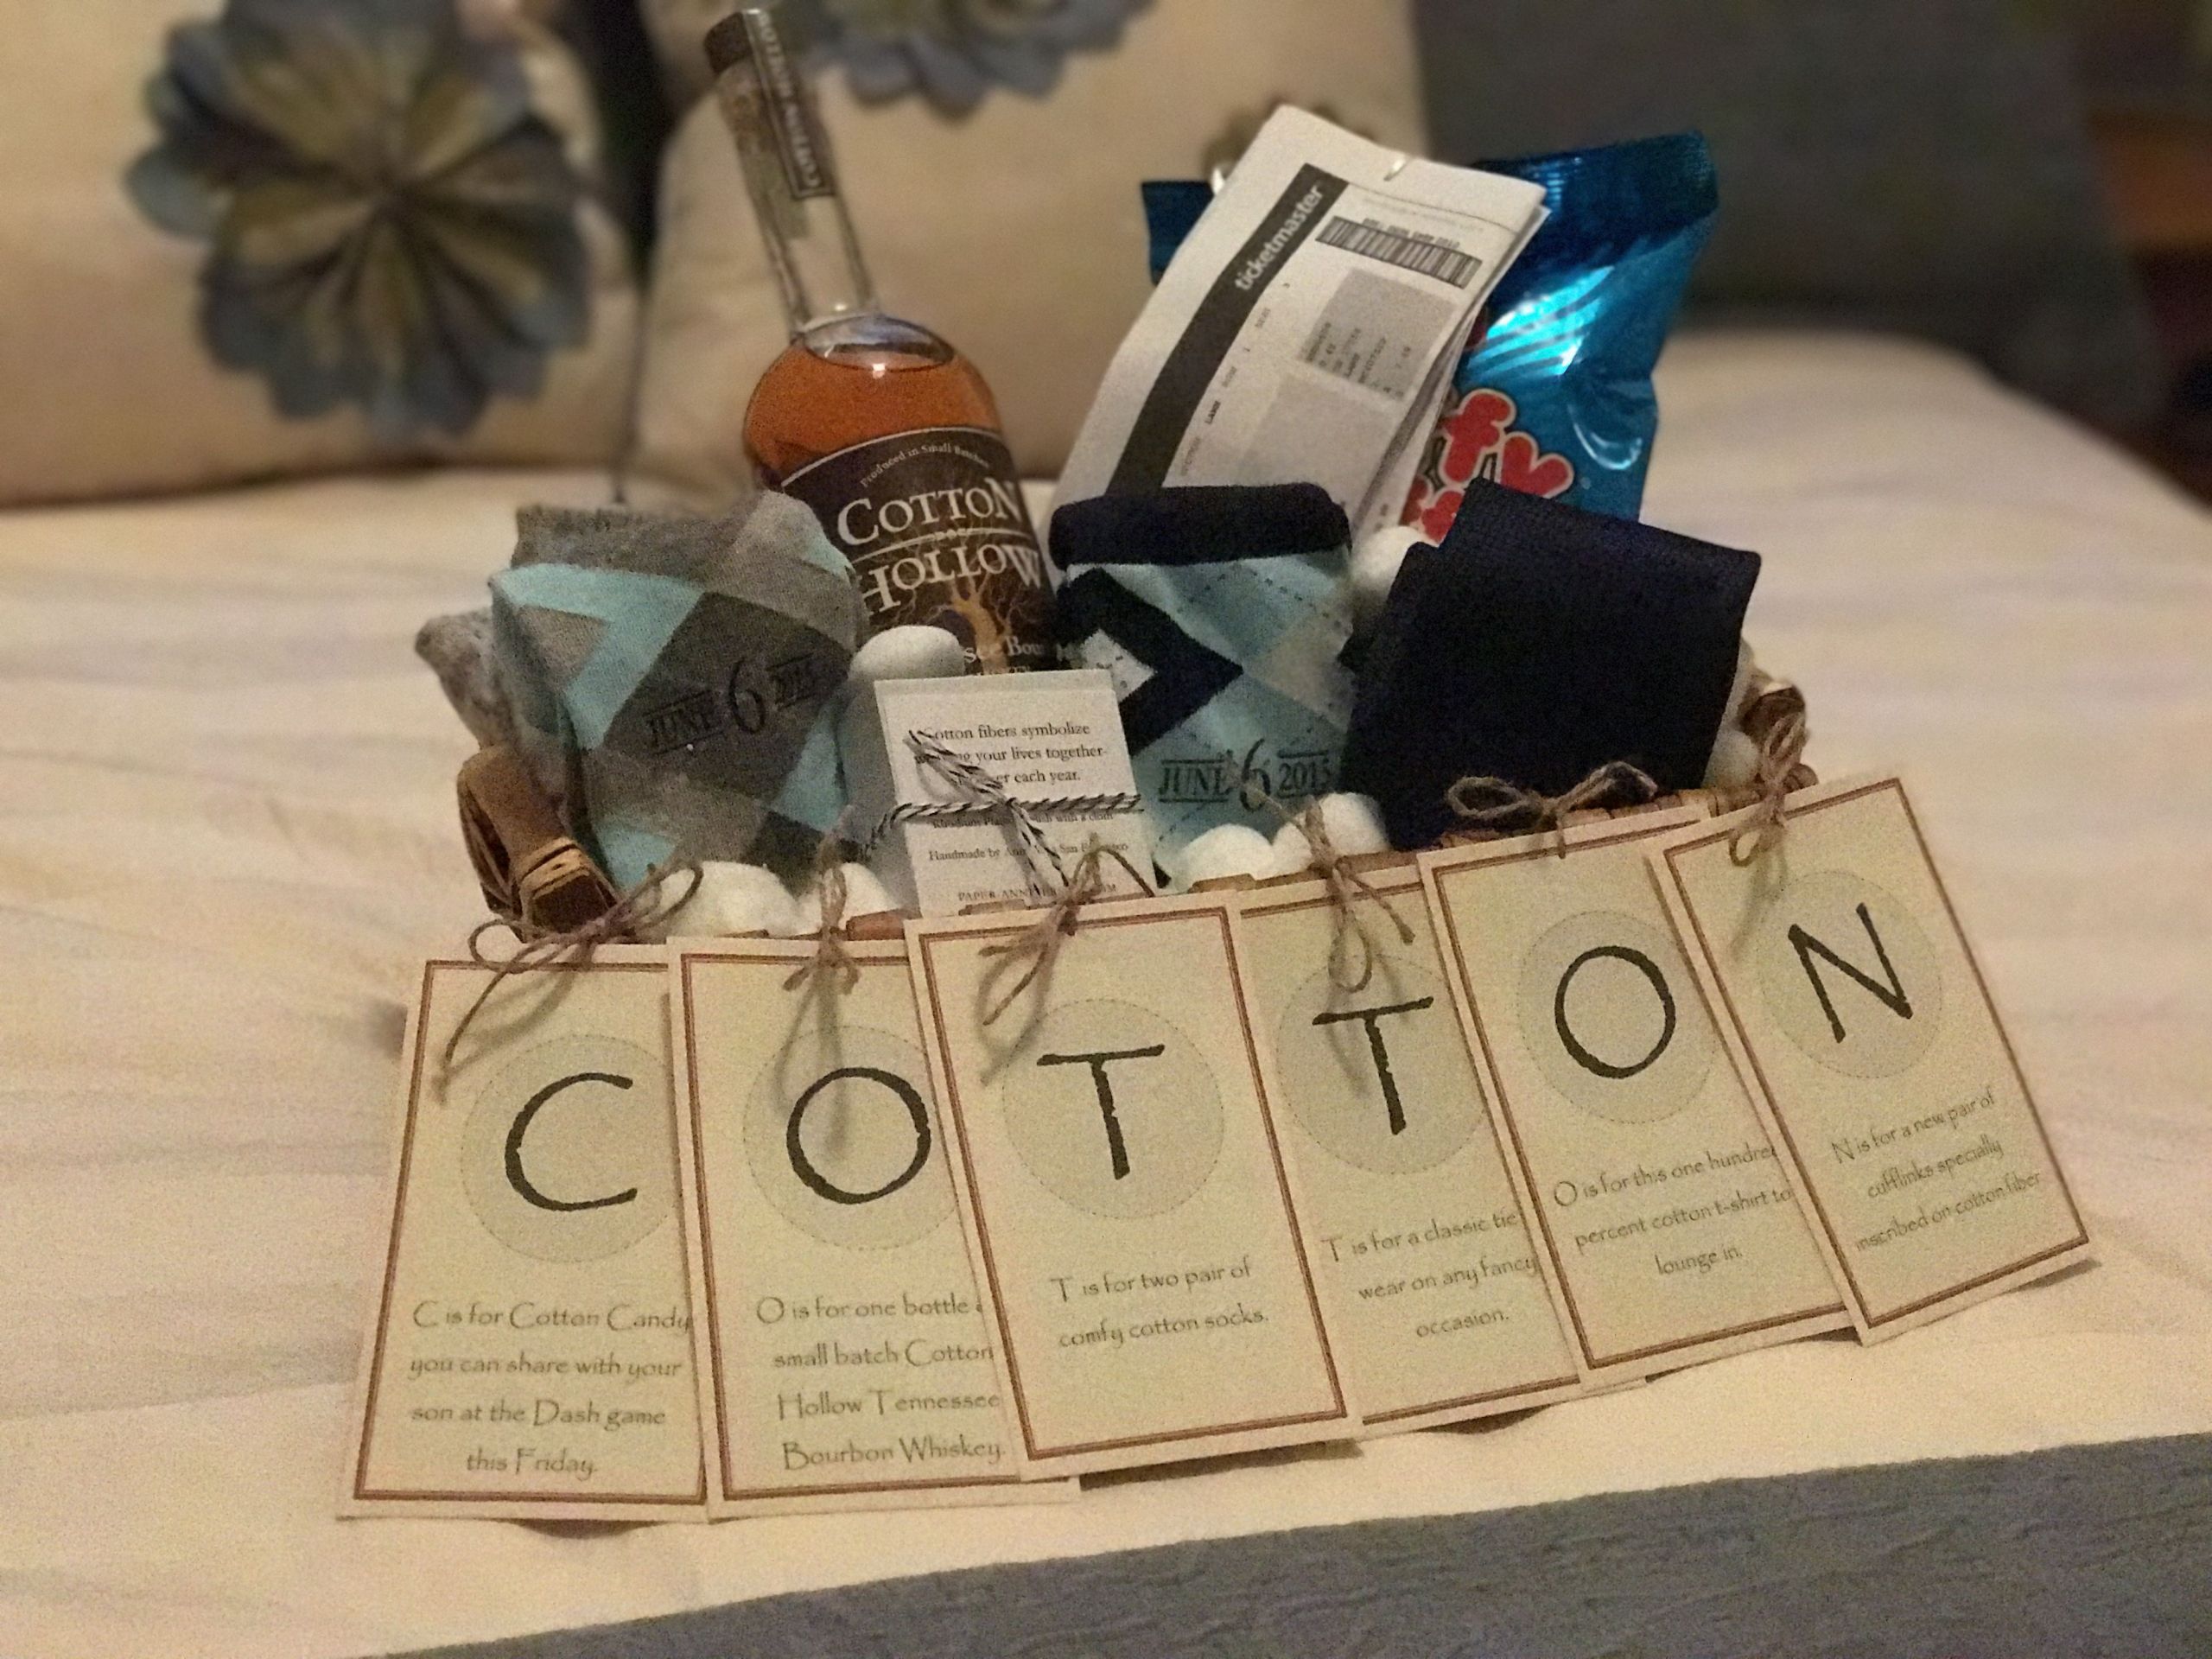 Second Anniversary Gift Ideas
 The "Cotton" Anniversary Gift for Him